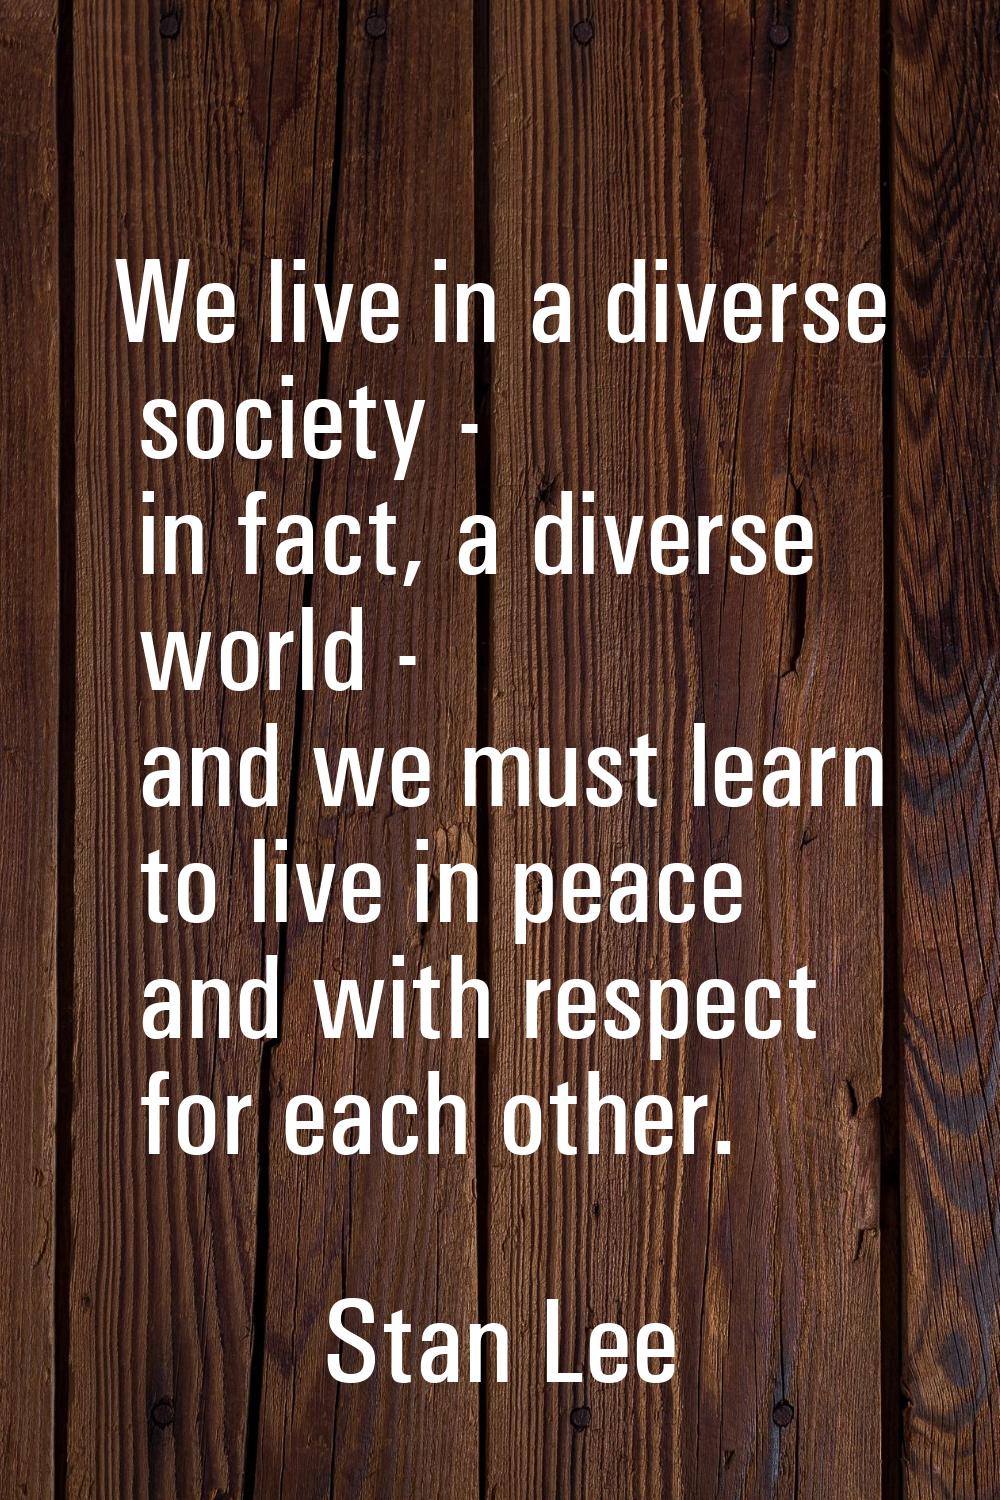 We live in a diverse society - in fact, a diverse world - and we must learn to live in peace and wi